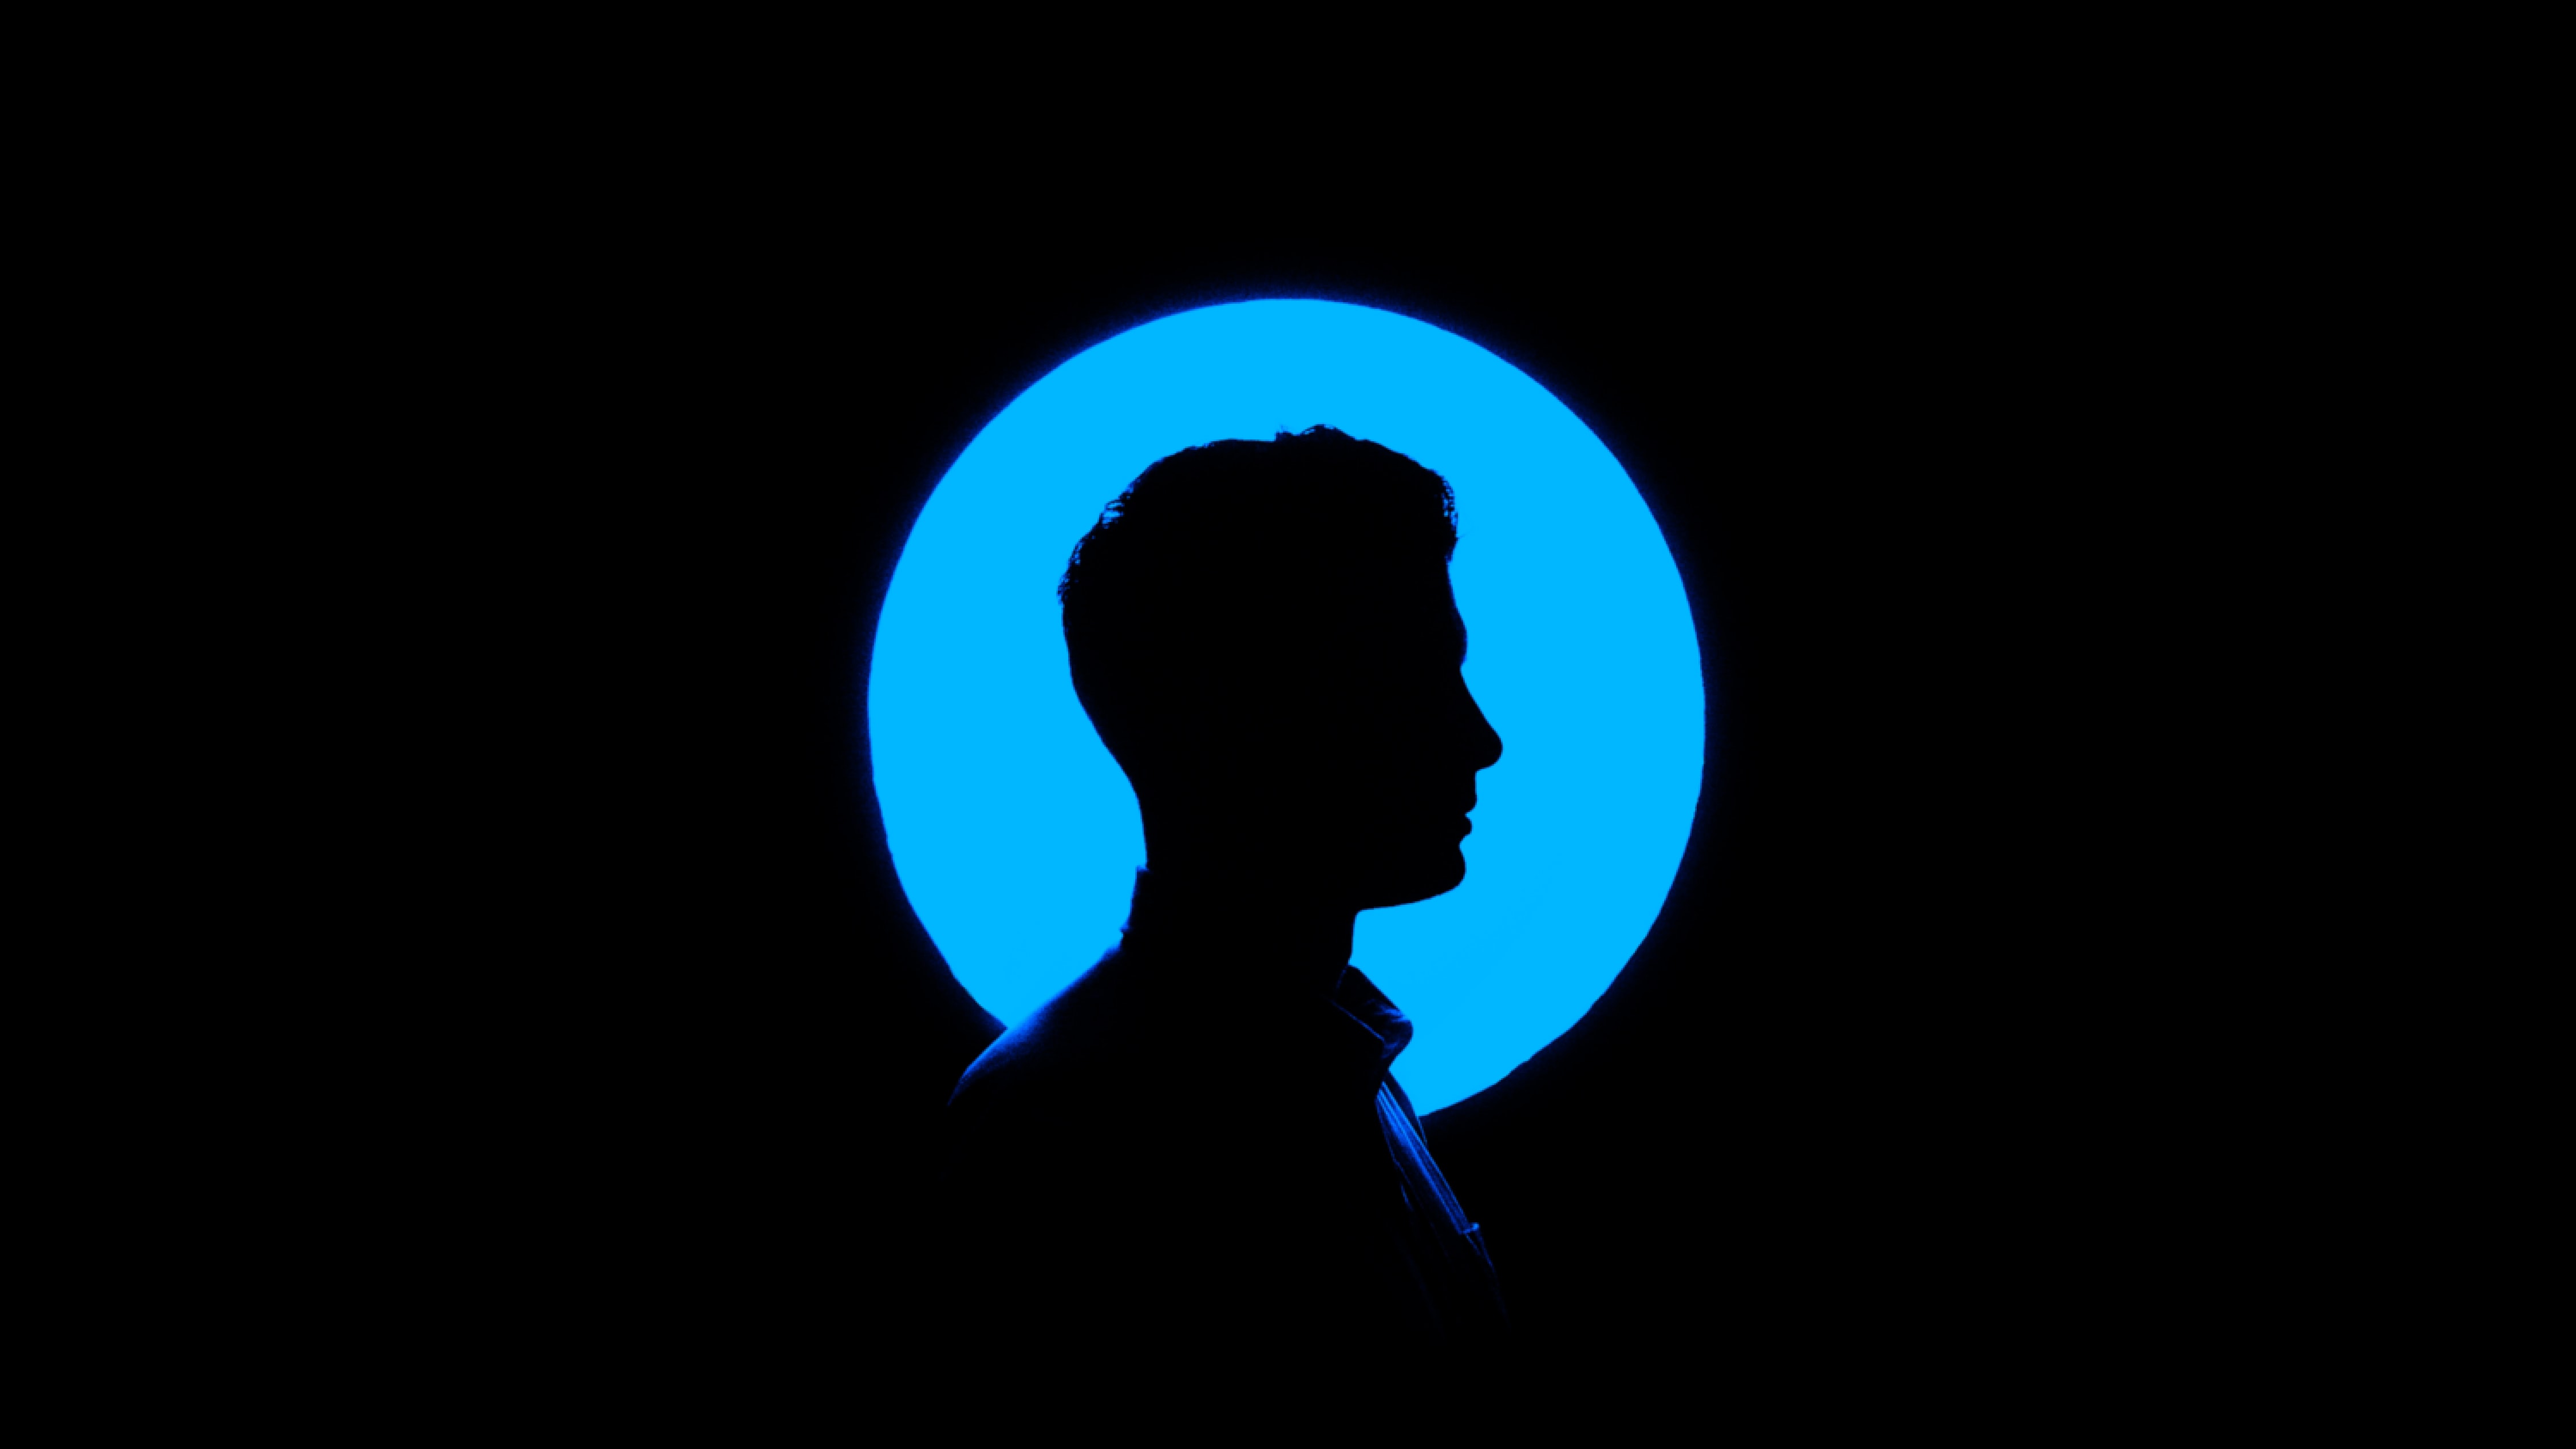 Silhouette of head profile against a blue background - 5 of the best copywriters of all time - Copify blog